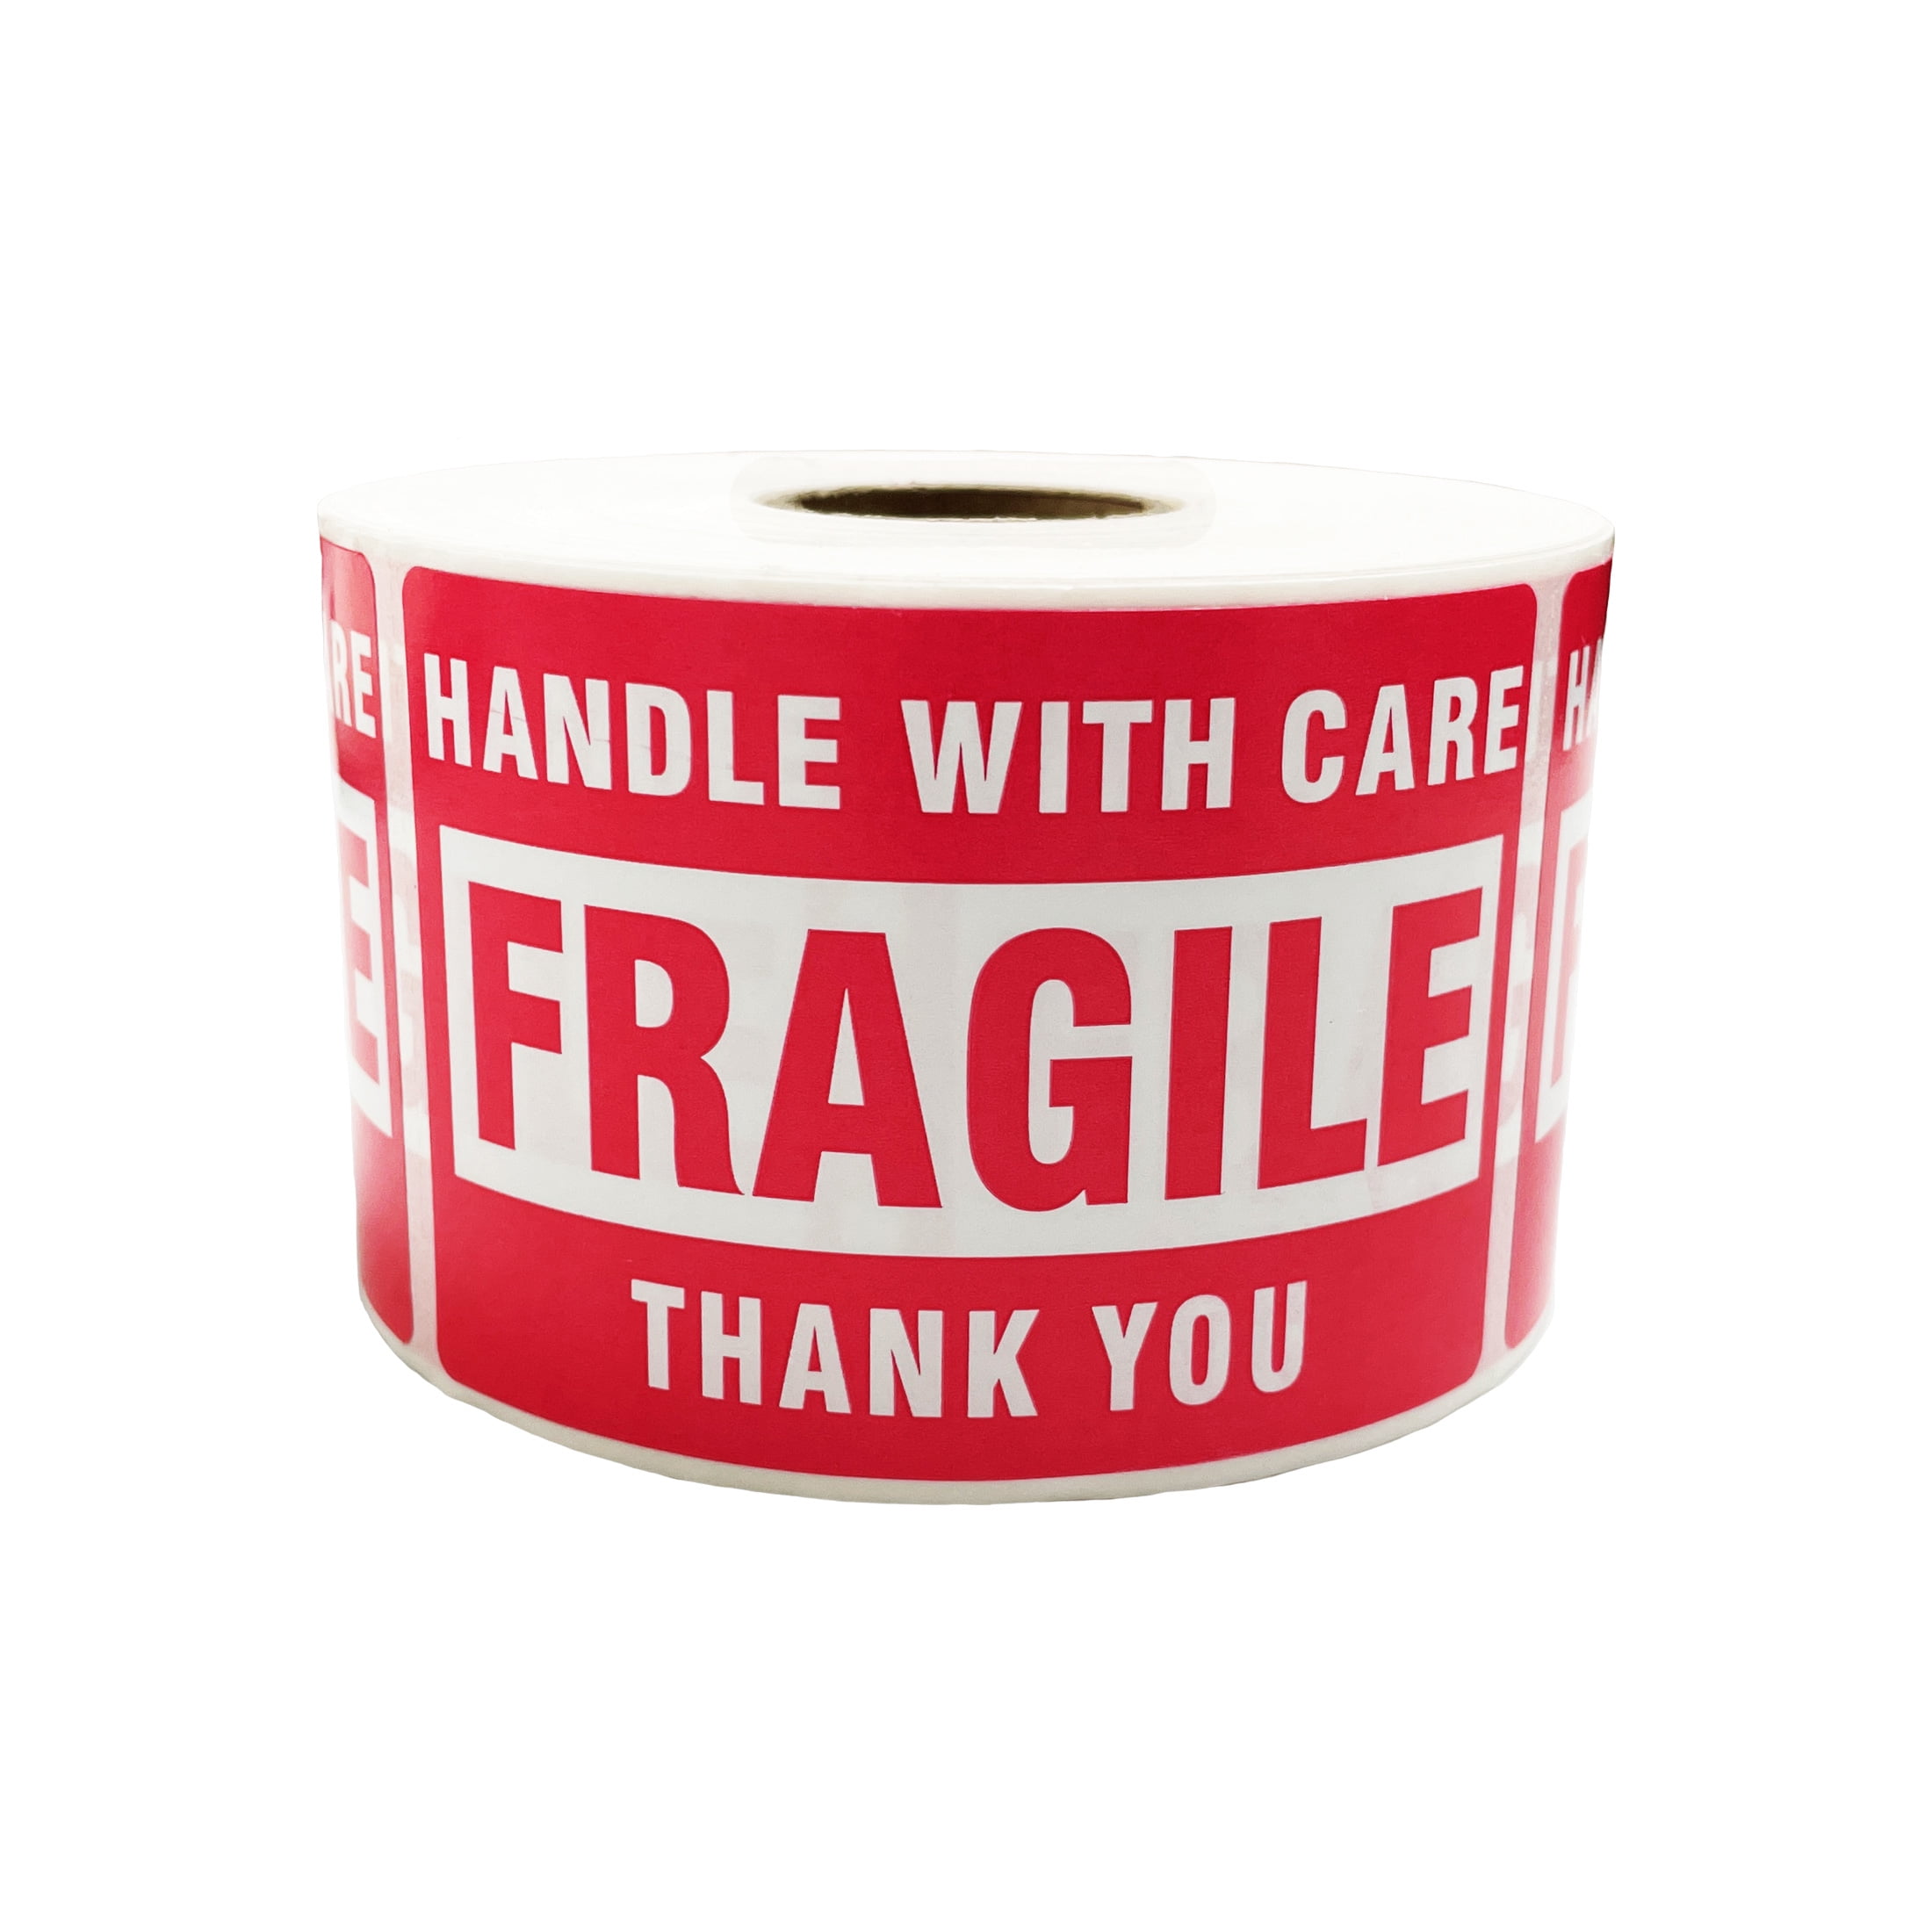 500 2 x 3 Fragile Handle with Care Label Sticker.Includes 5 white smiley labels 